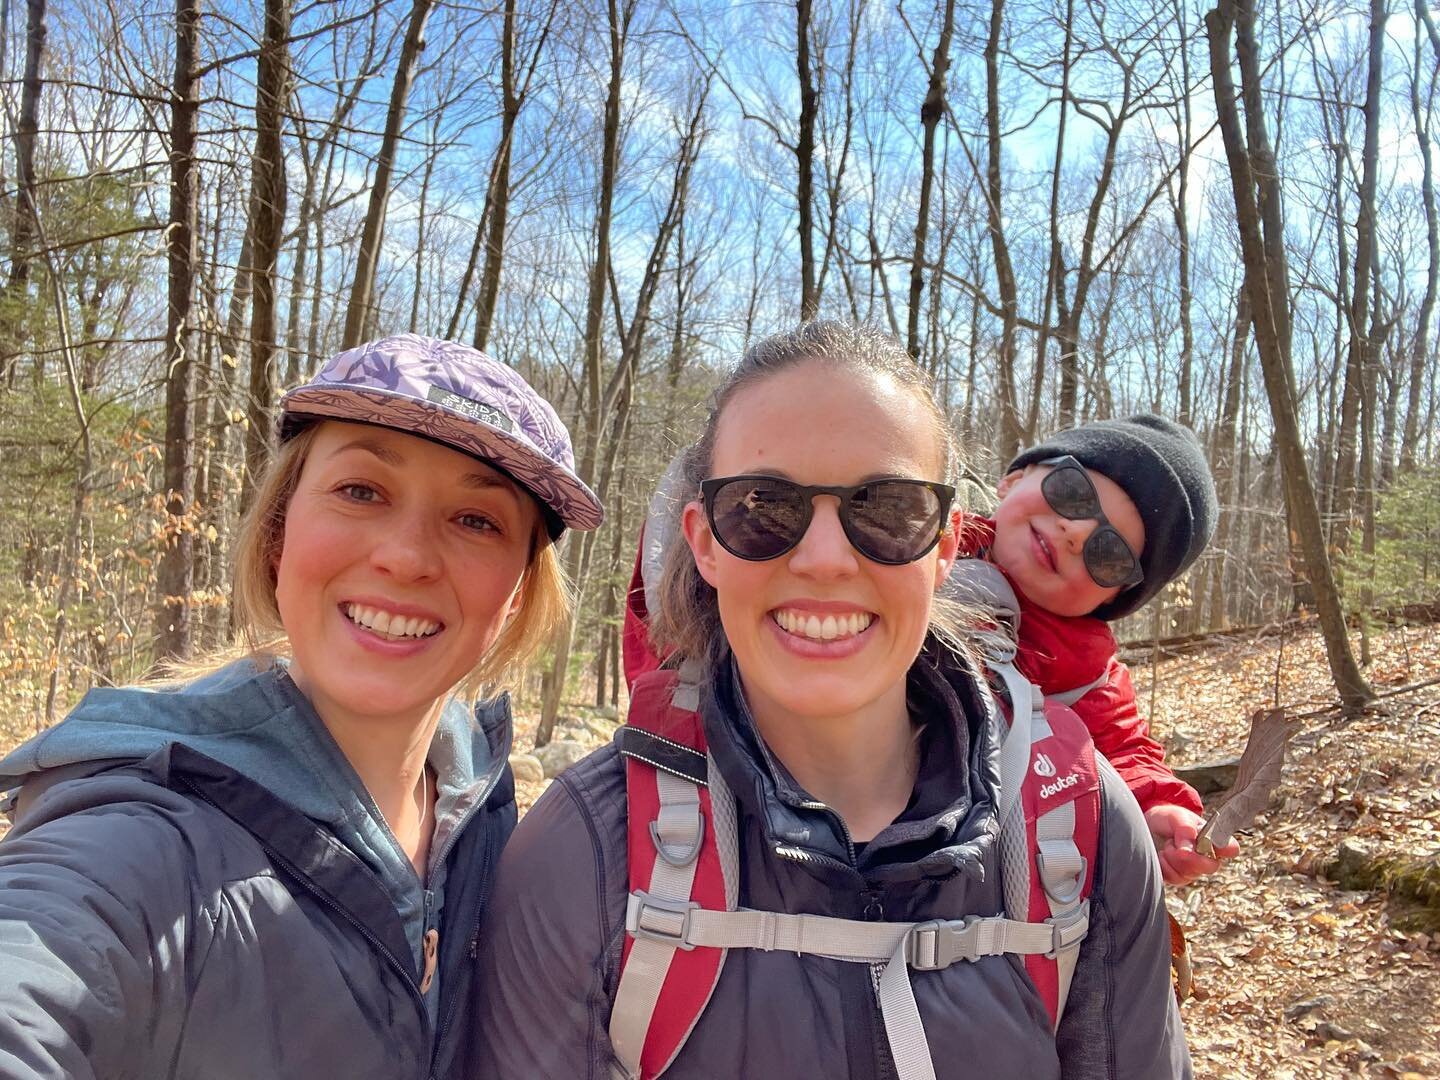 Turns out a hike in the woods, some Vitamin D and time with an old friend was just what we needed this week .. Thanks &ldquo;Mack&rdquo; for a fun morning! ☀️ 

#optoutside #getoutside #spendtimeinnature #vitamindtherapy #moveyourbody